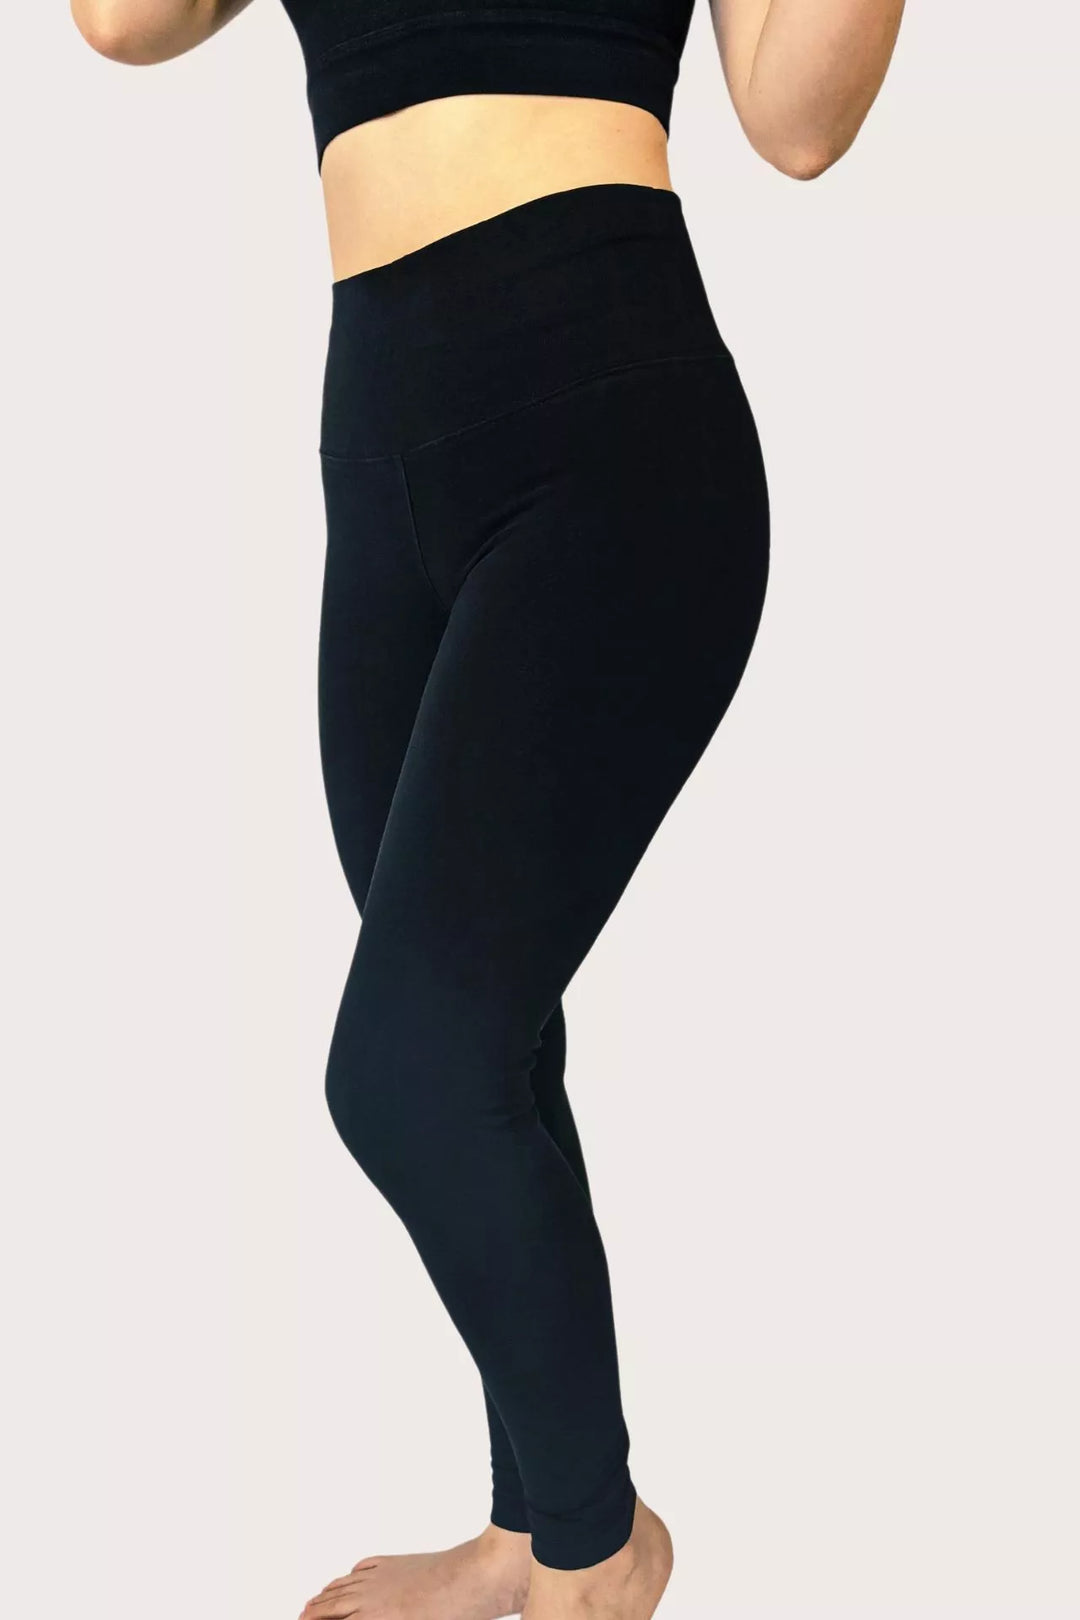 In Action Stretch Organic Cotton Leggings